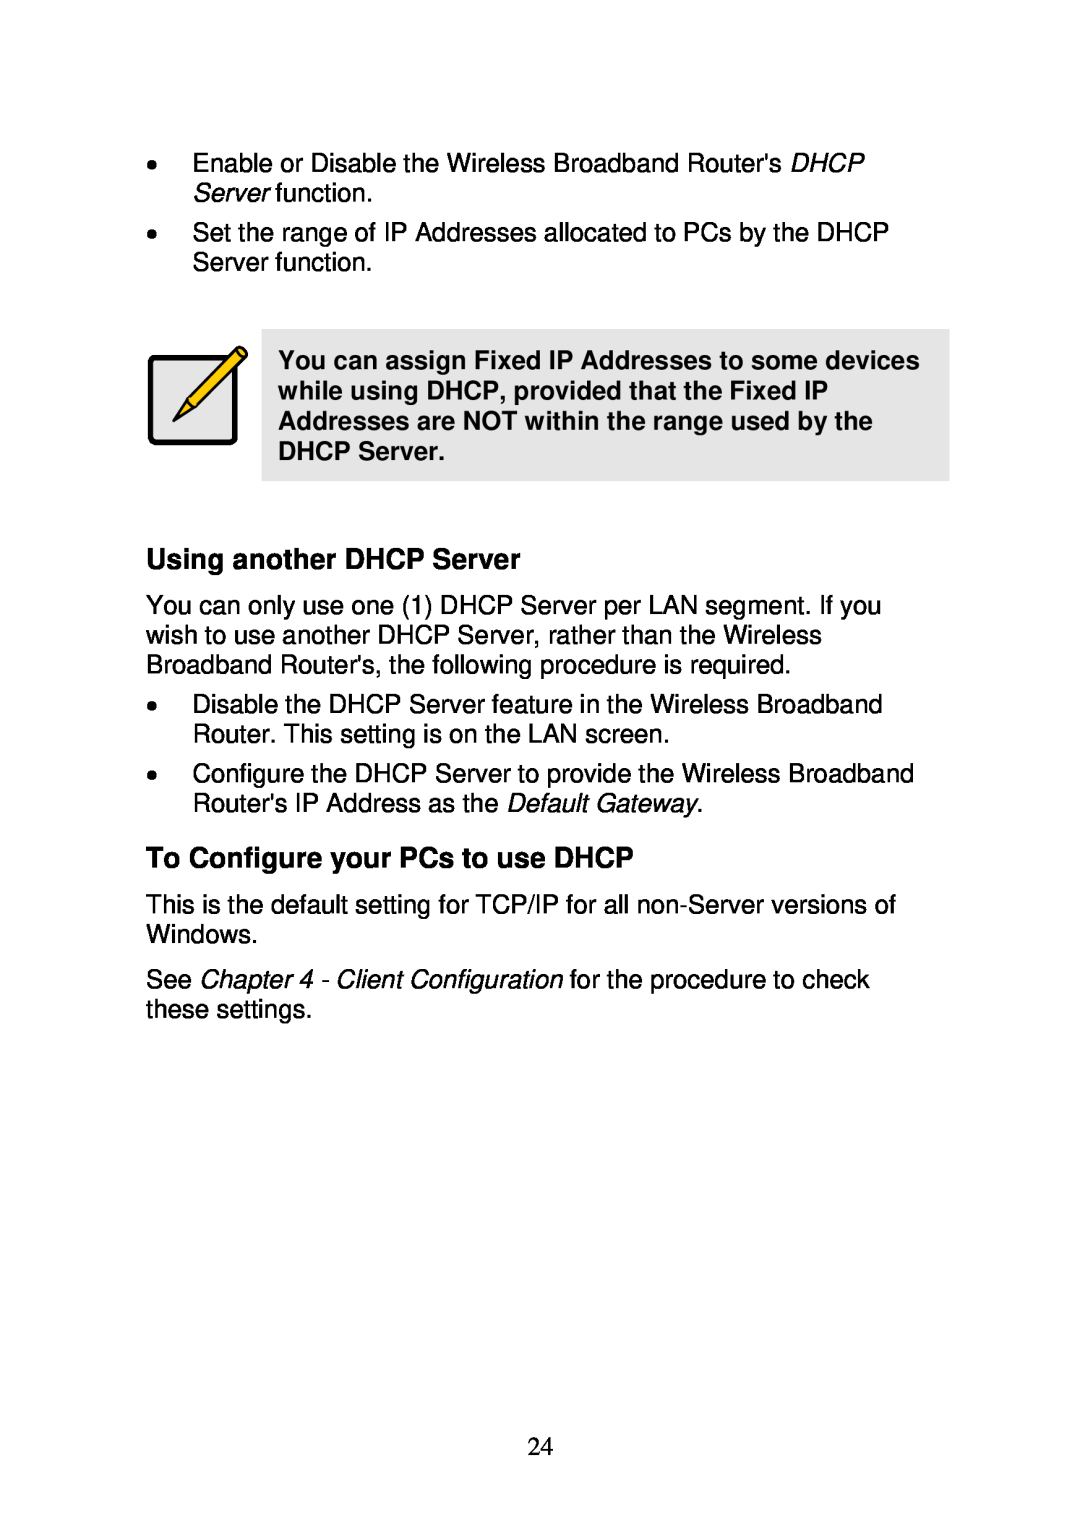 3Com WBR-6000 user manual Using another DHCP Server, To Configure your PCs to use DHCP 